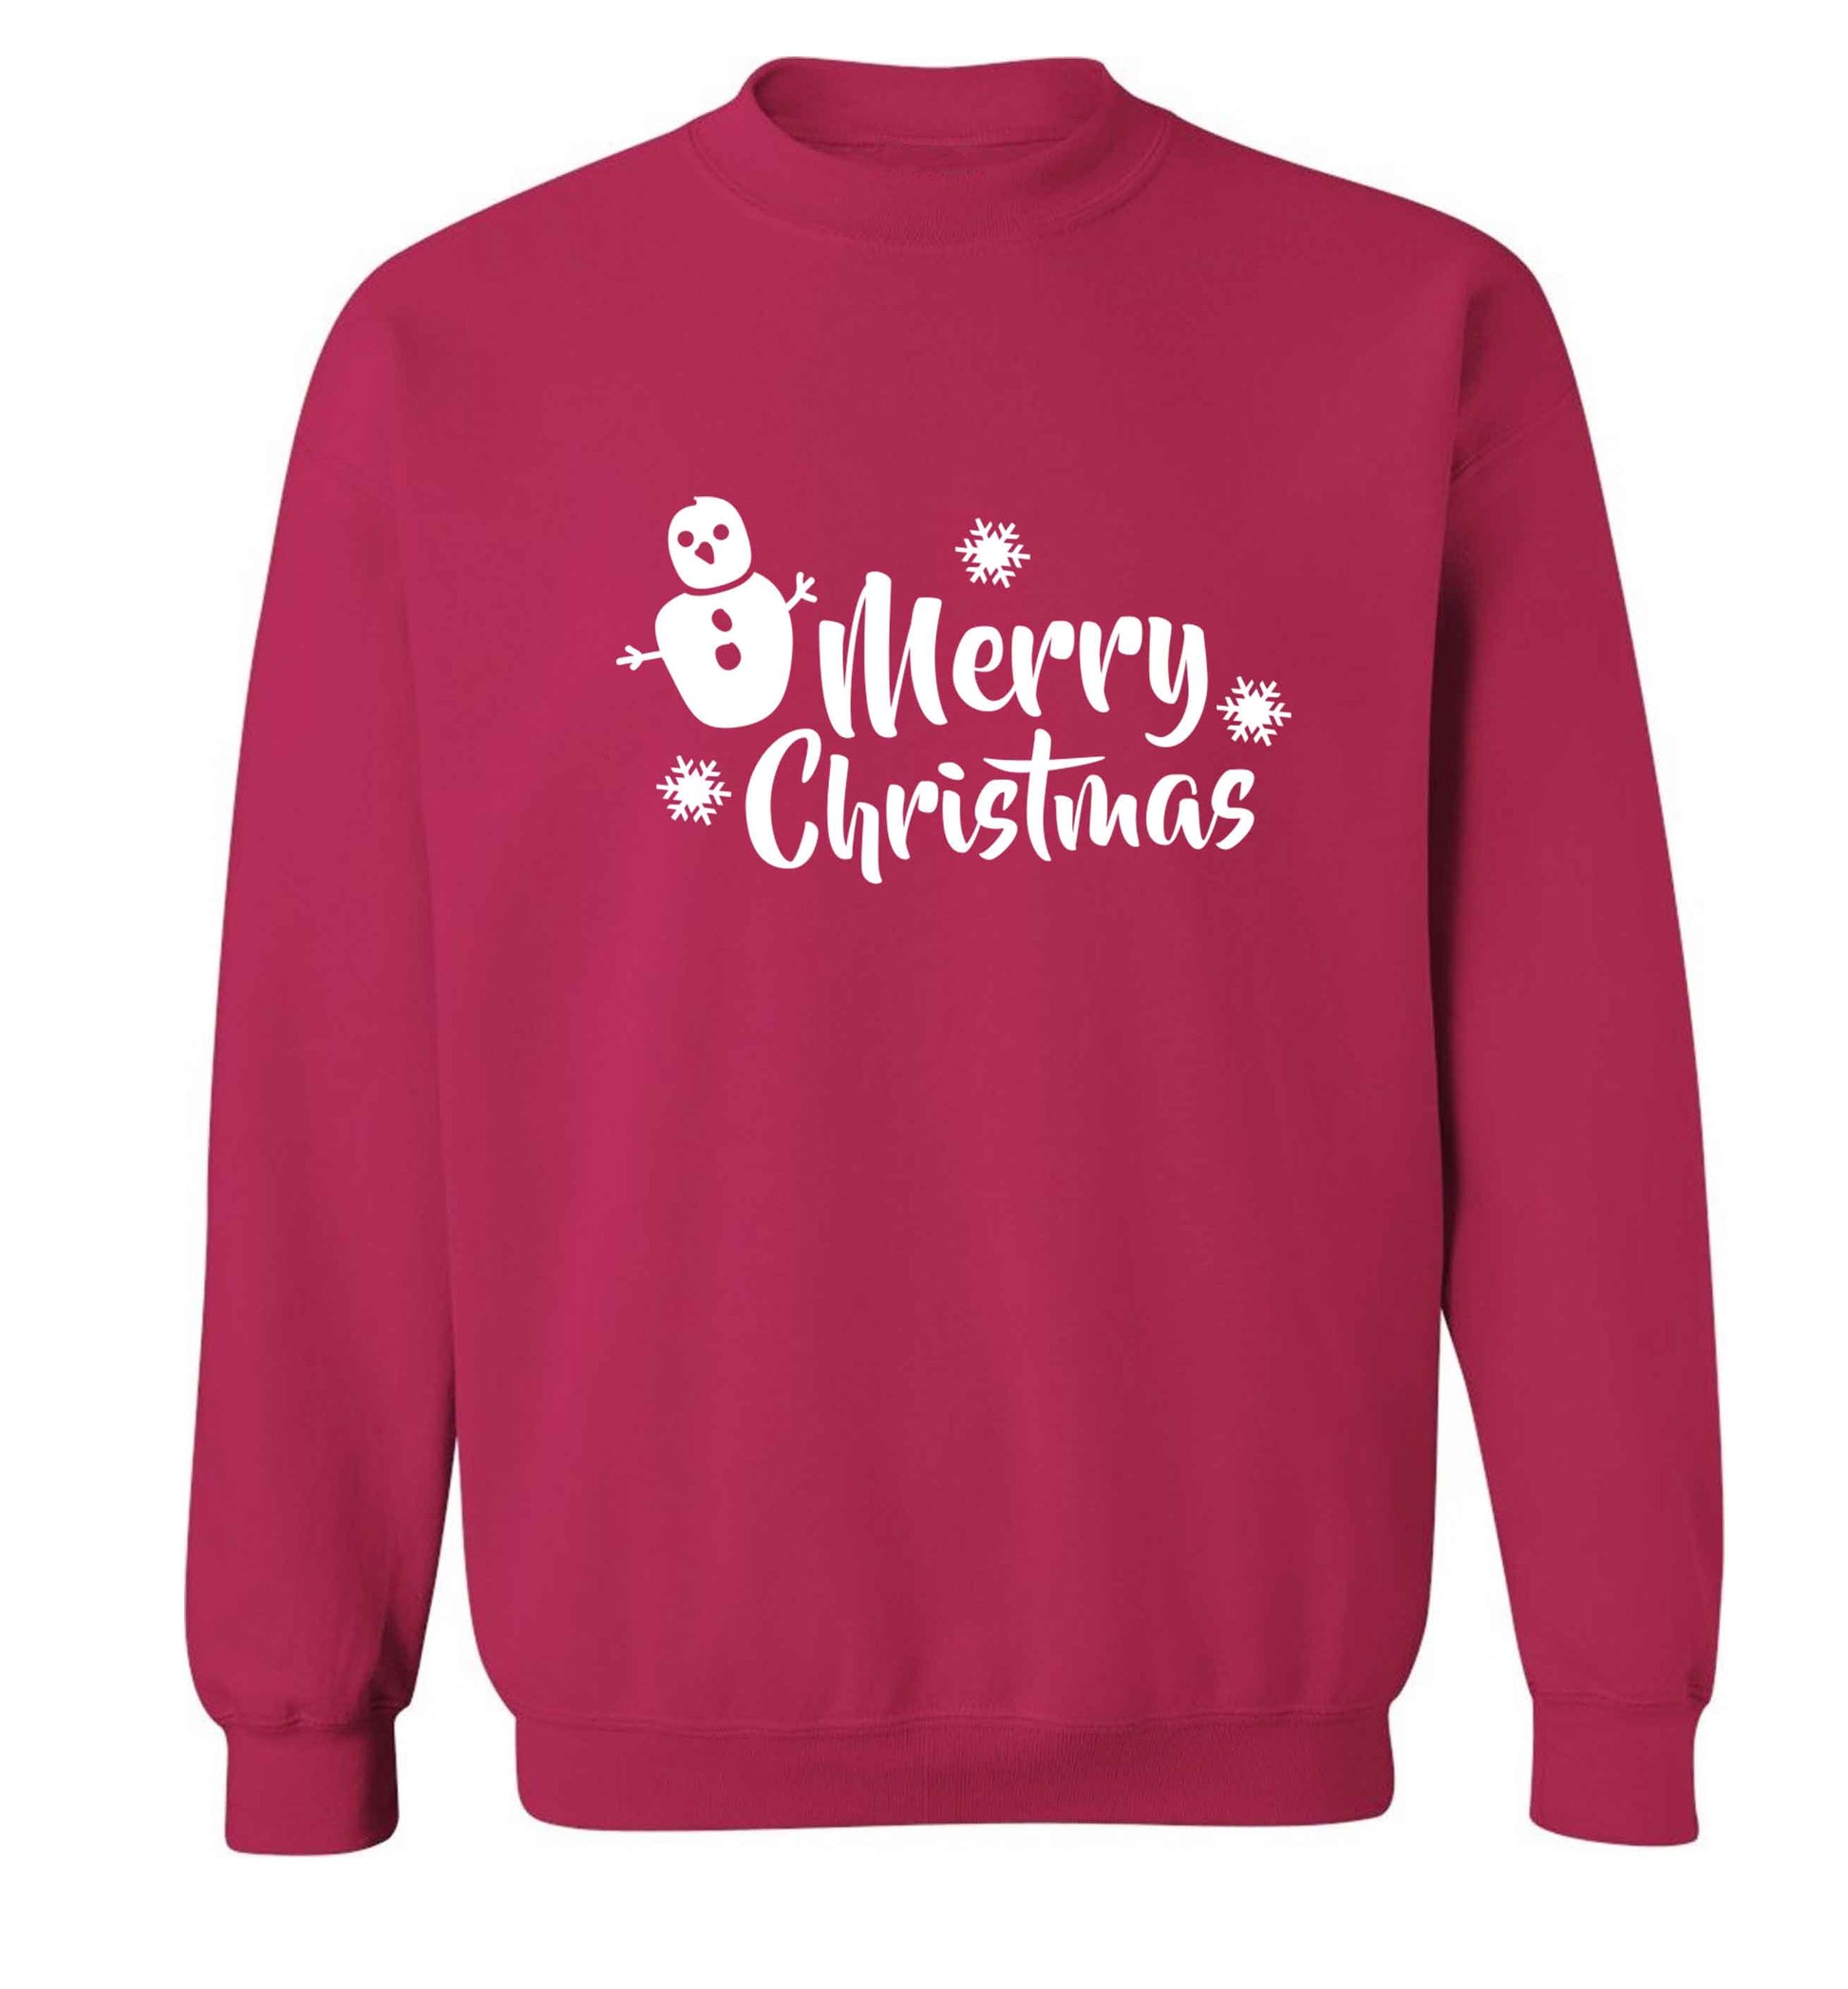 Merry Christmas - snowman adult's unisex pink sweater 2XL